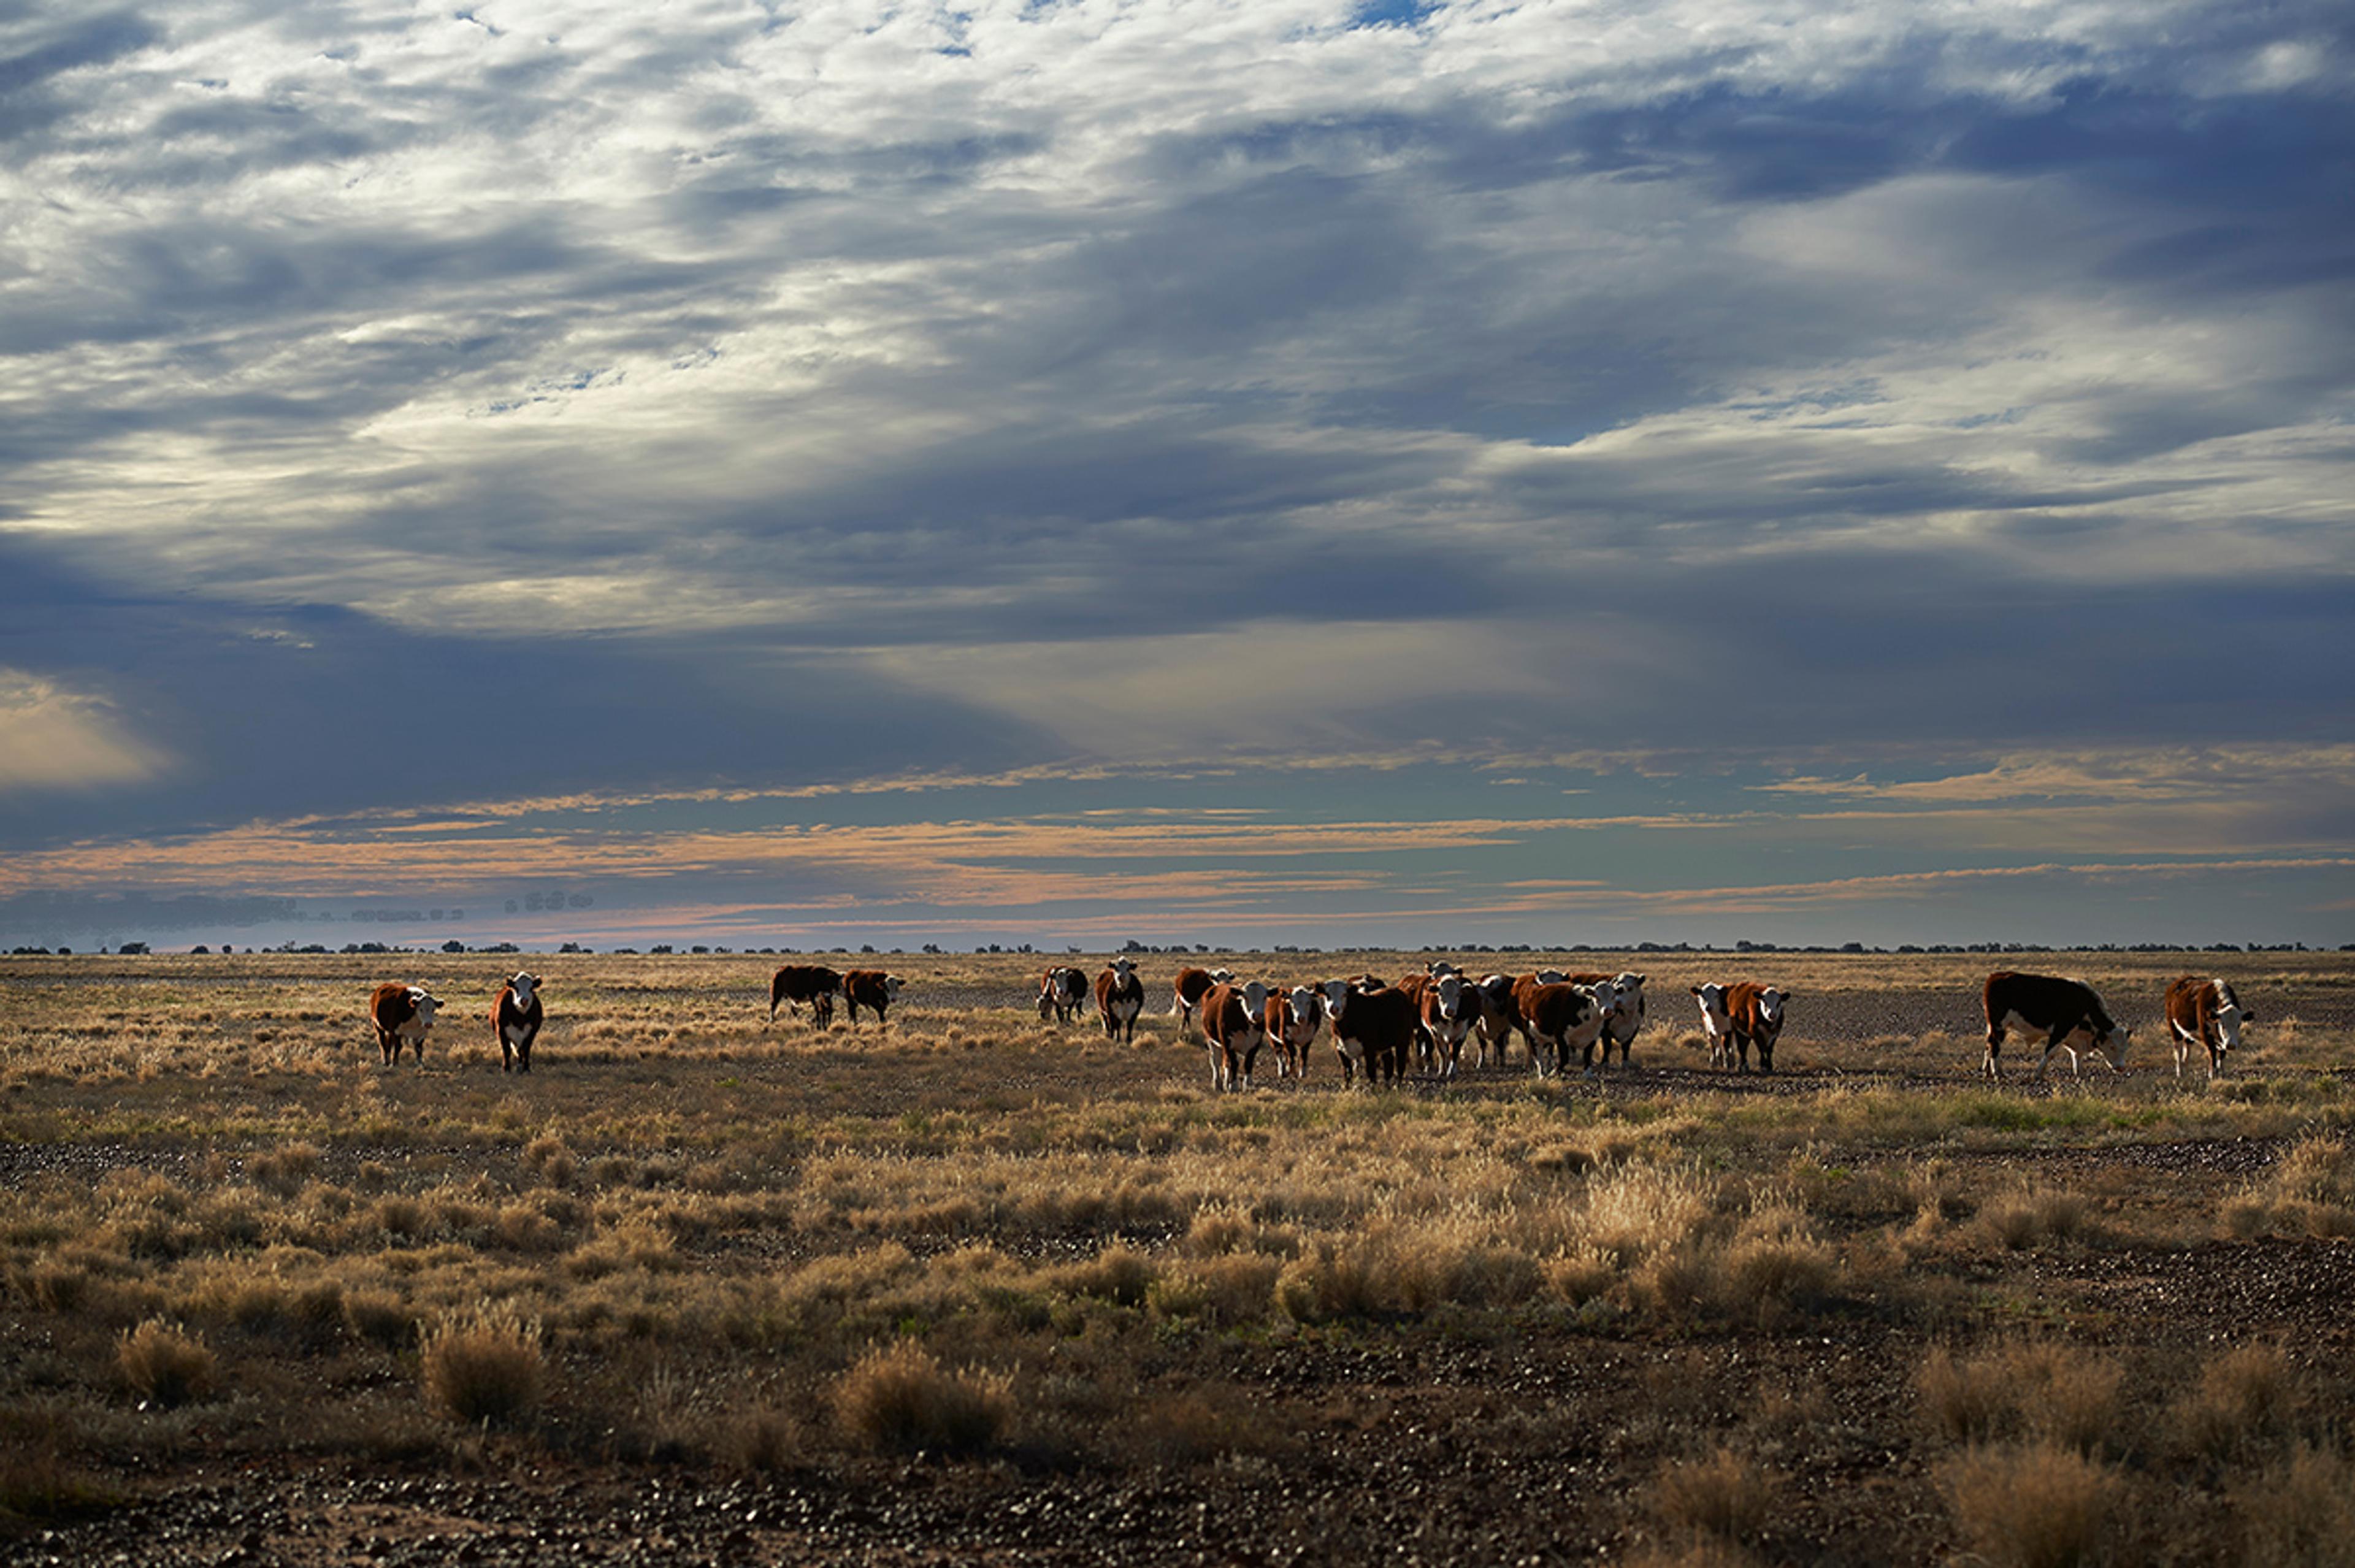 A group of brown and white cows graze dry grasses against a pink and blue sunset sky.